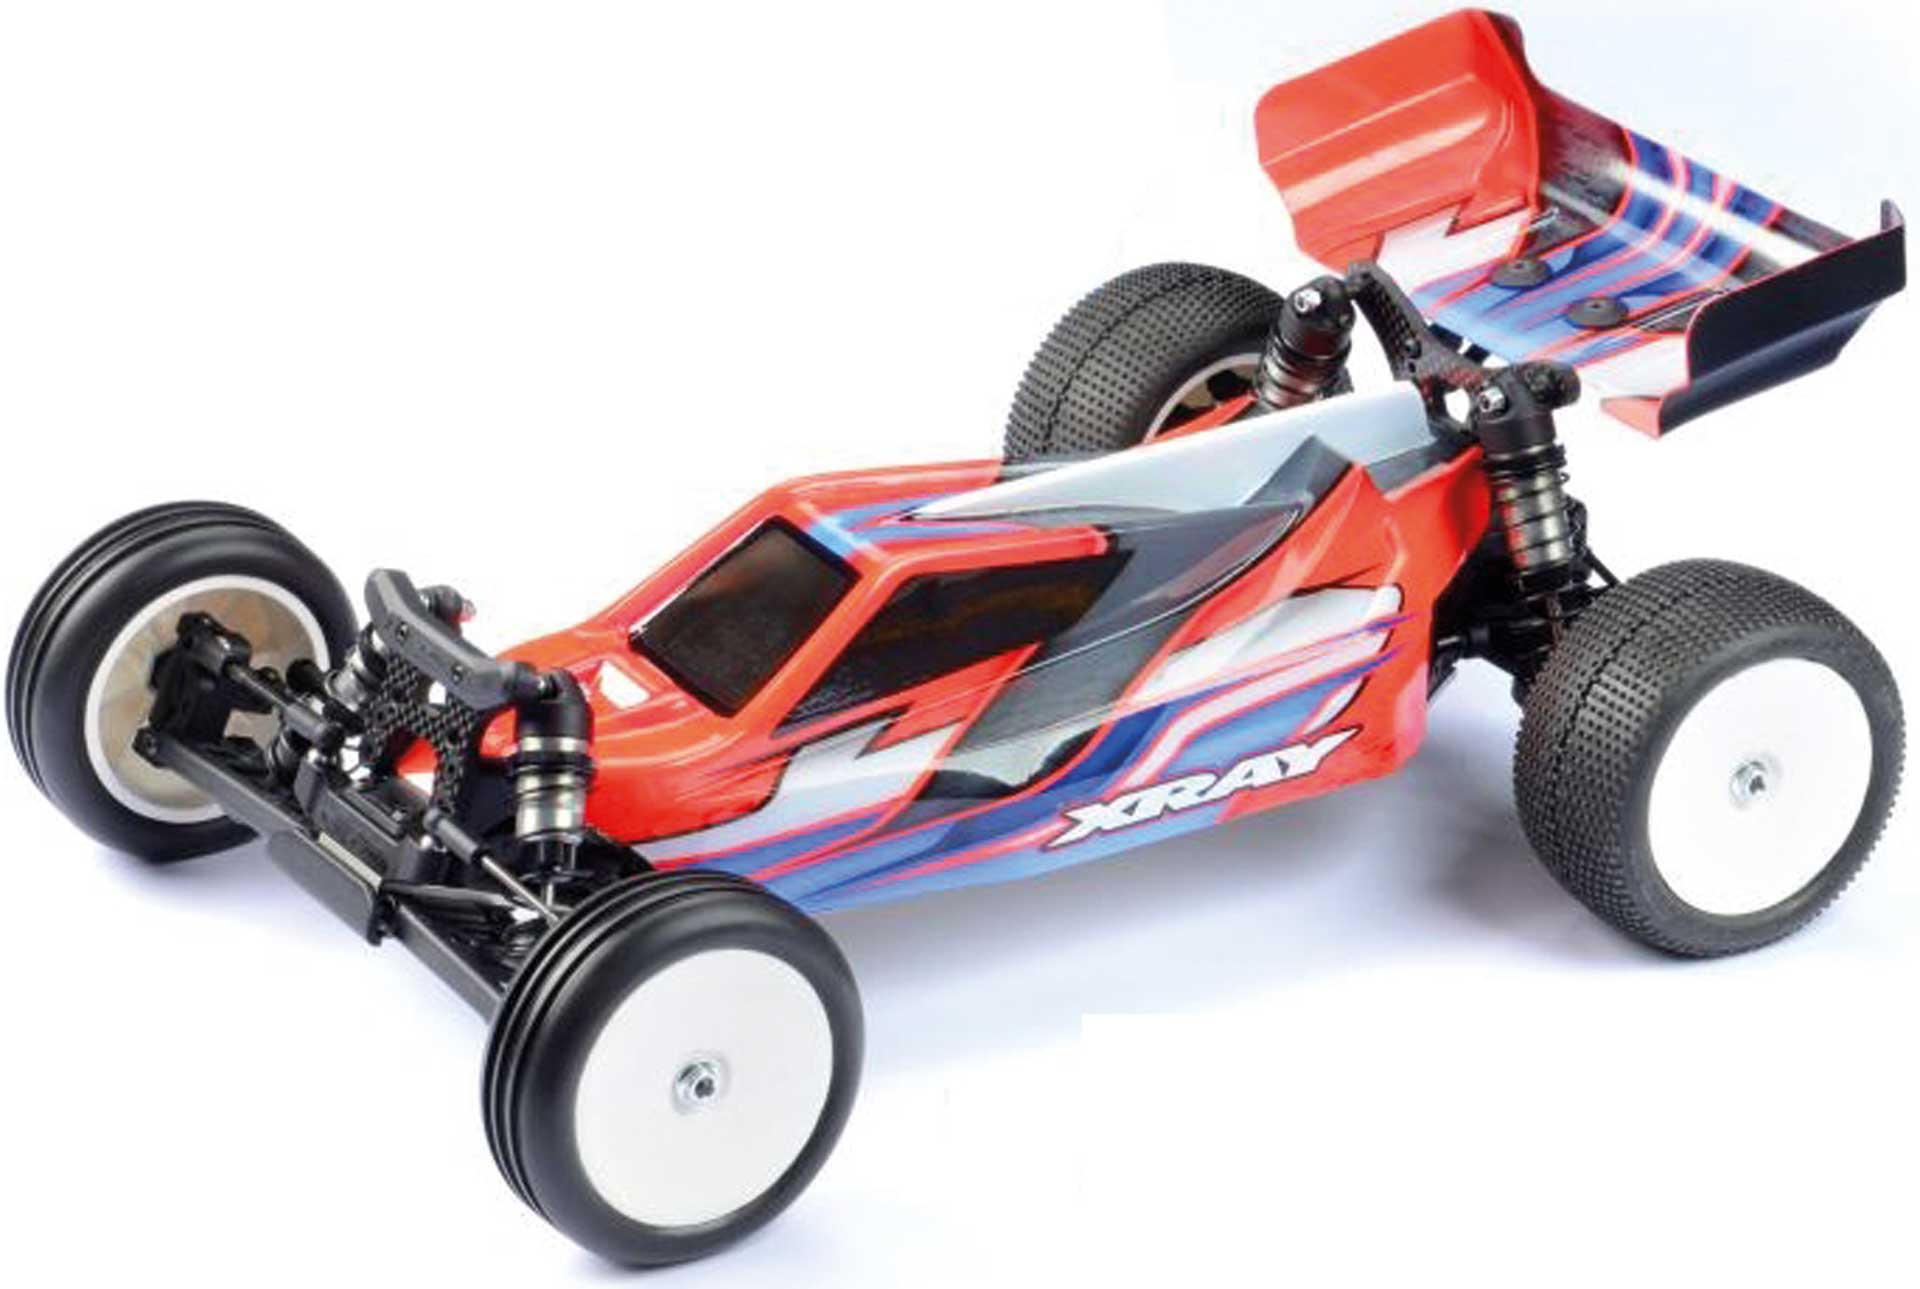 XRAY XB2D'24 - 2WD 1/10 ELECTRIC OFF-ROAD CAR - DIRT EDITION